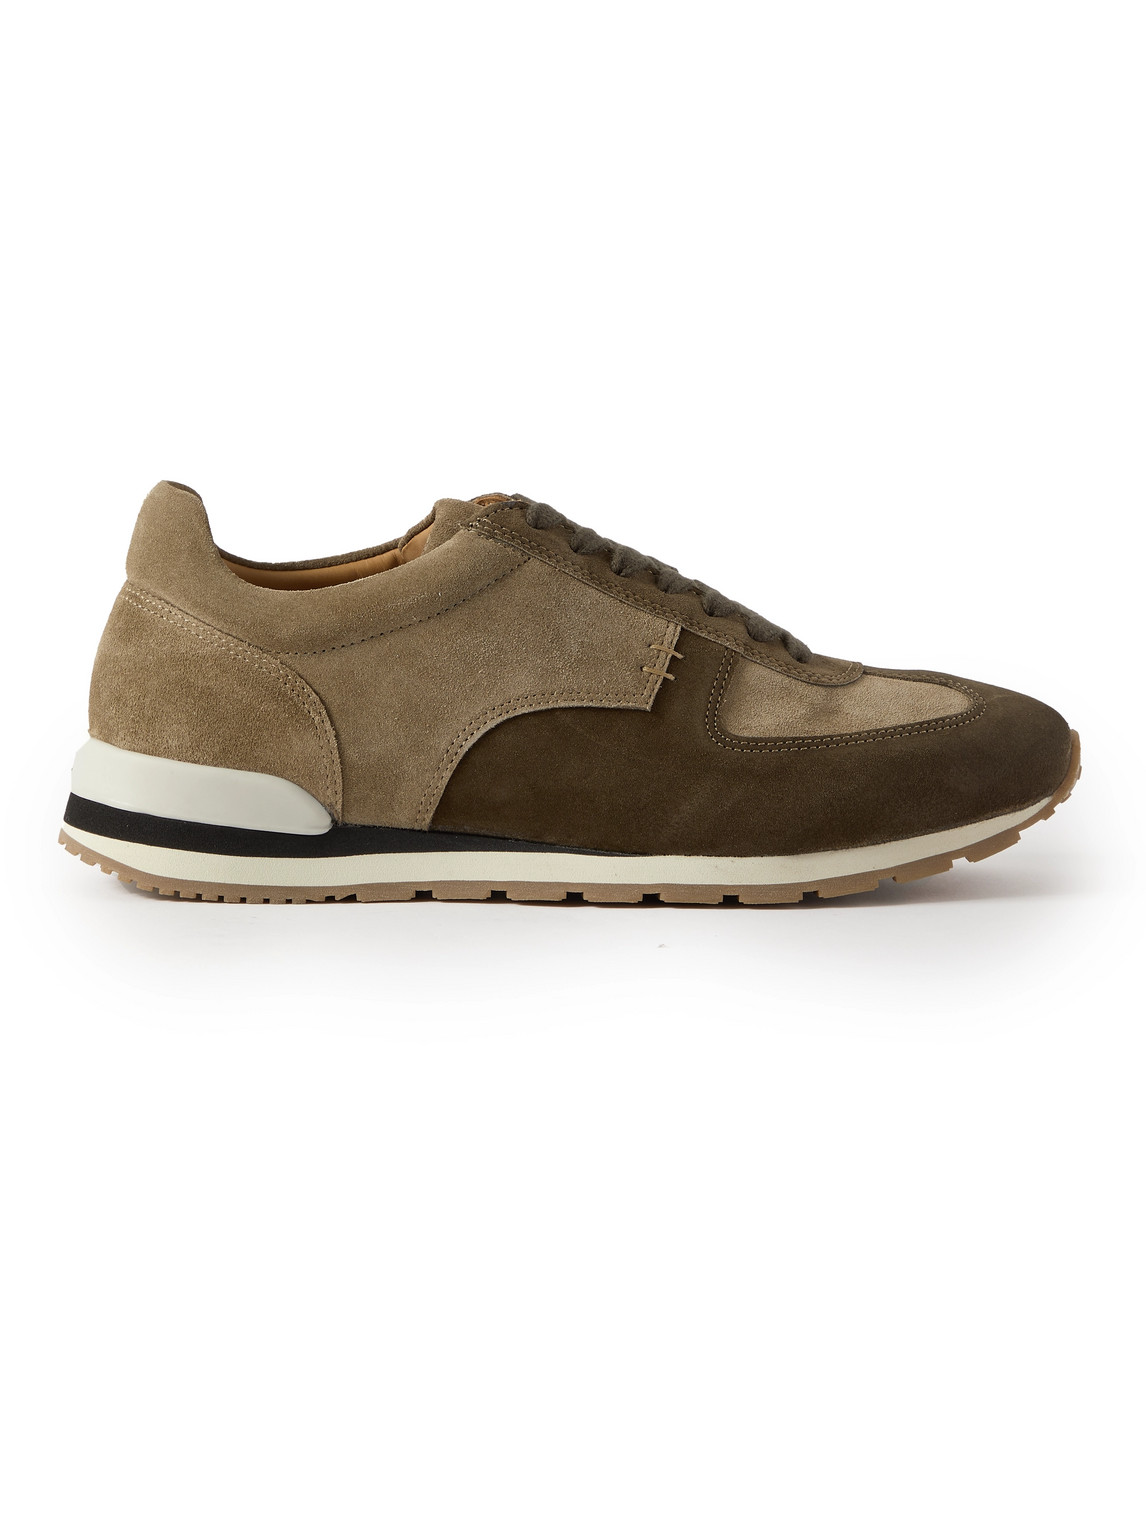 Mr P. '70s Regenerated Suede By Evolo® Sneakers In Brown